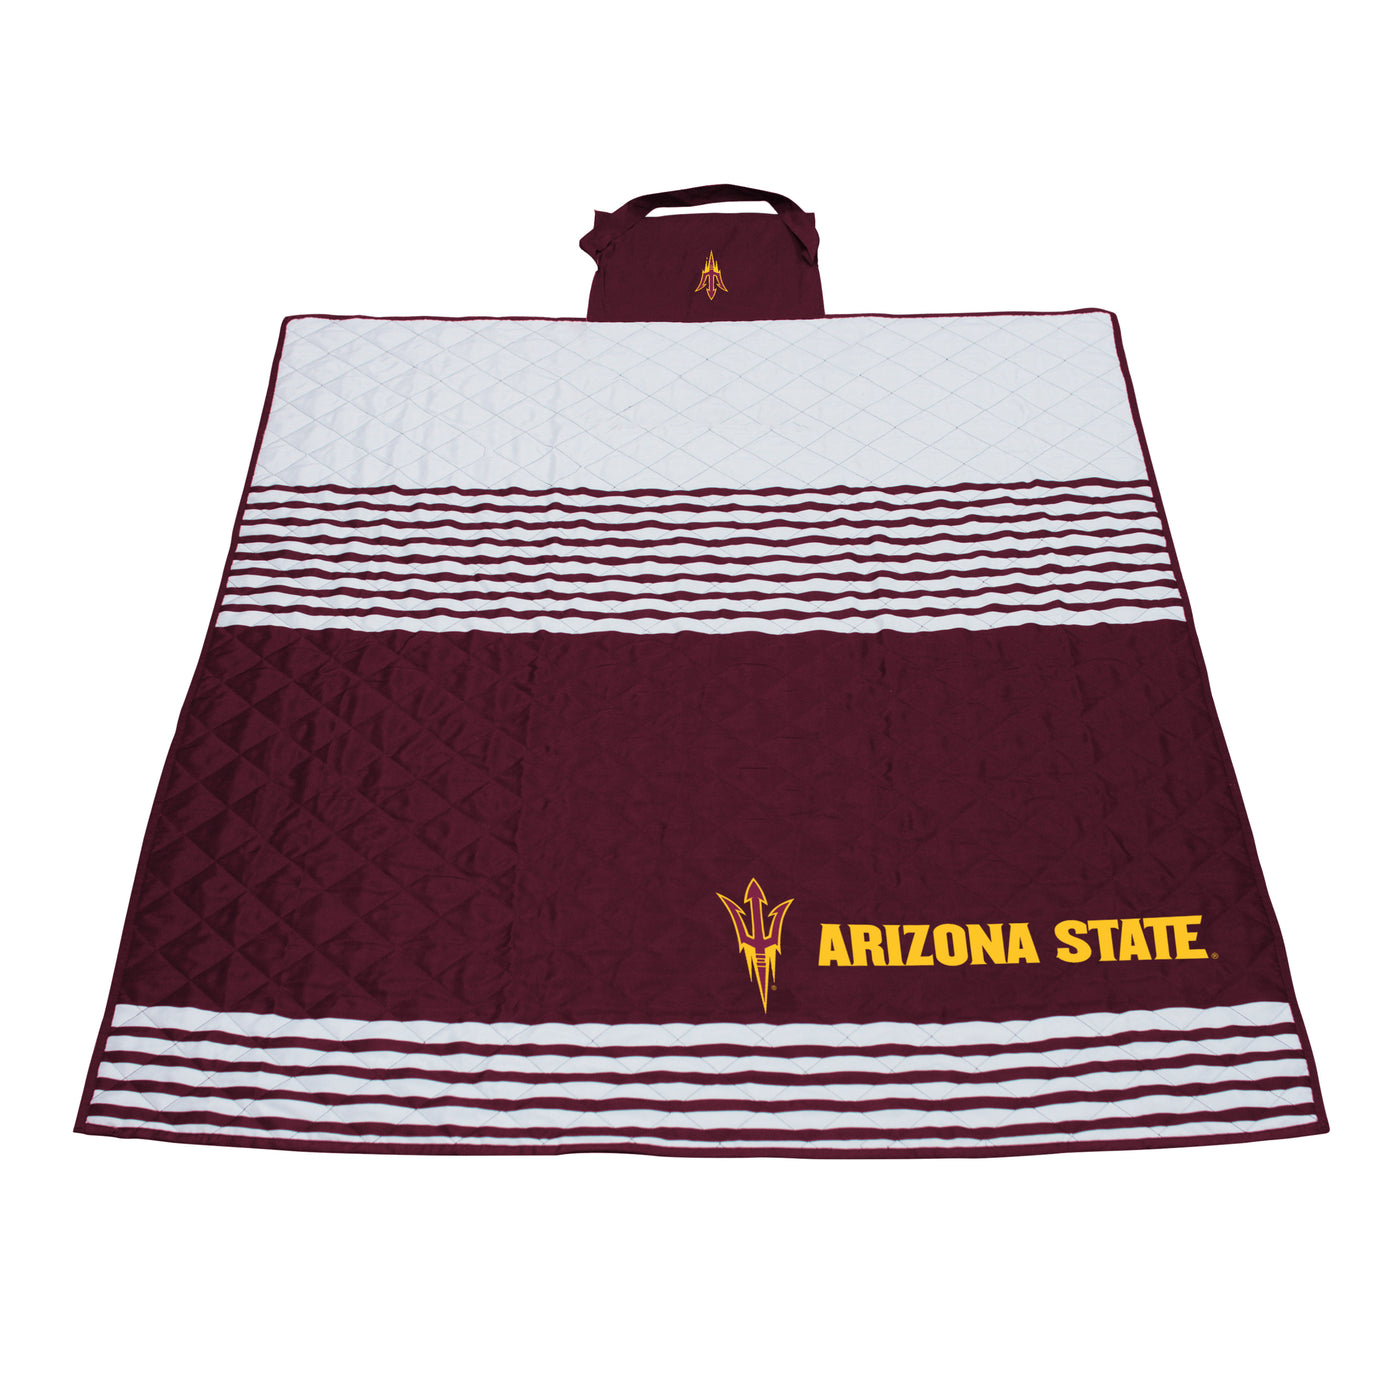 ASU white and maroon striped blanket. has a pitchfork and Arizona State text. Comes with an attached bag to fold the blanket into. 